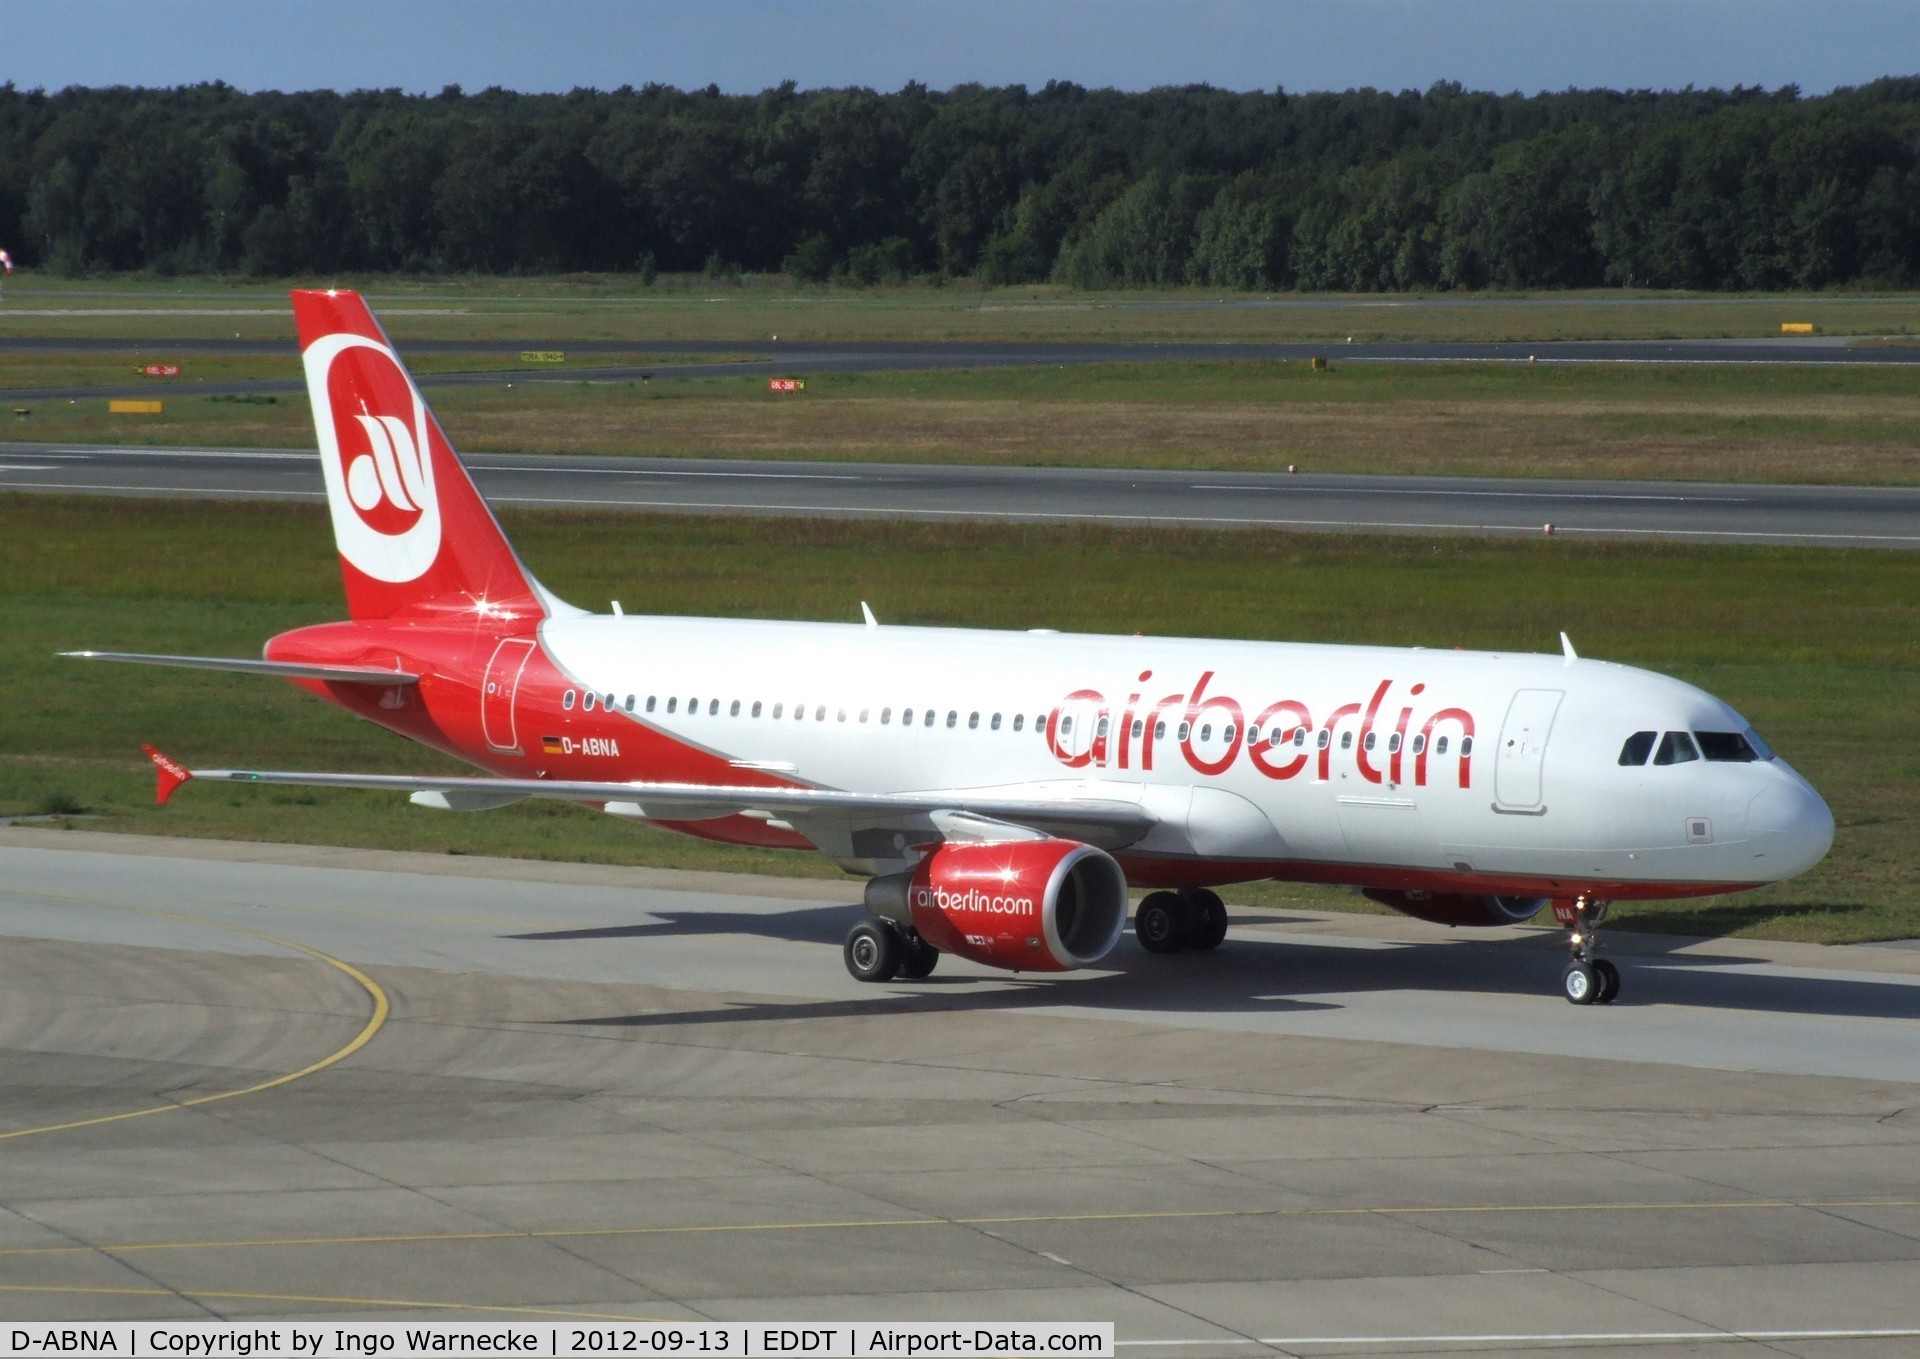 D-ABNA, 2012 Airbus A320-214 C/N 5191, Airbus A320-214 of airberlin at Berlin-Tegel airport